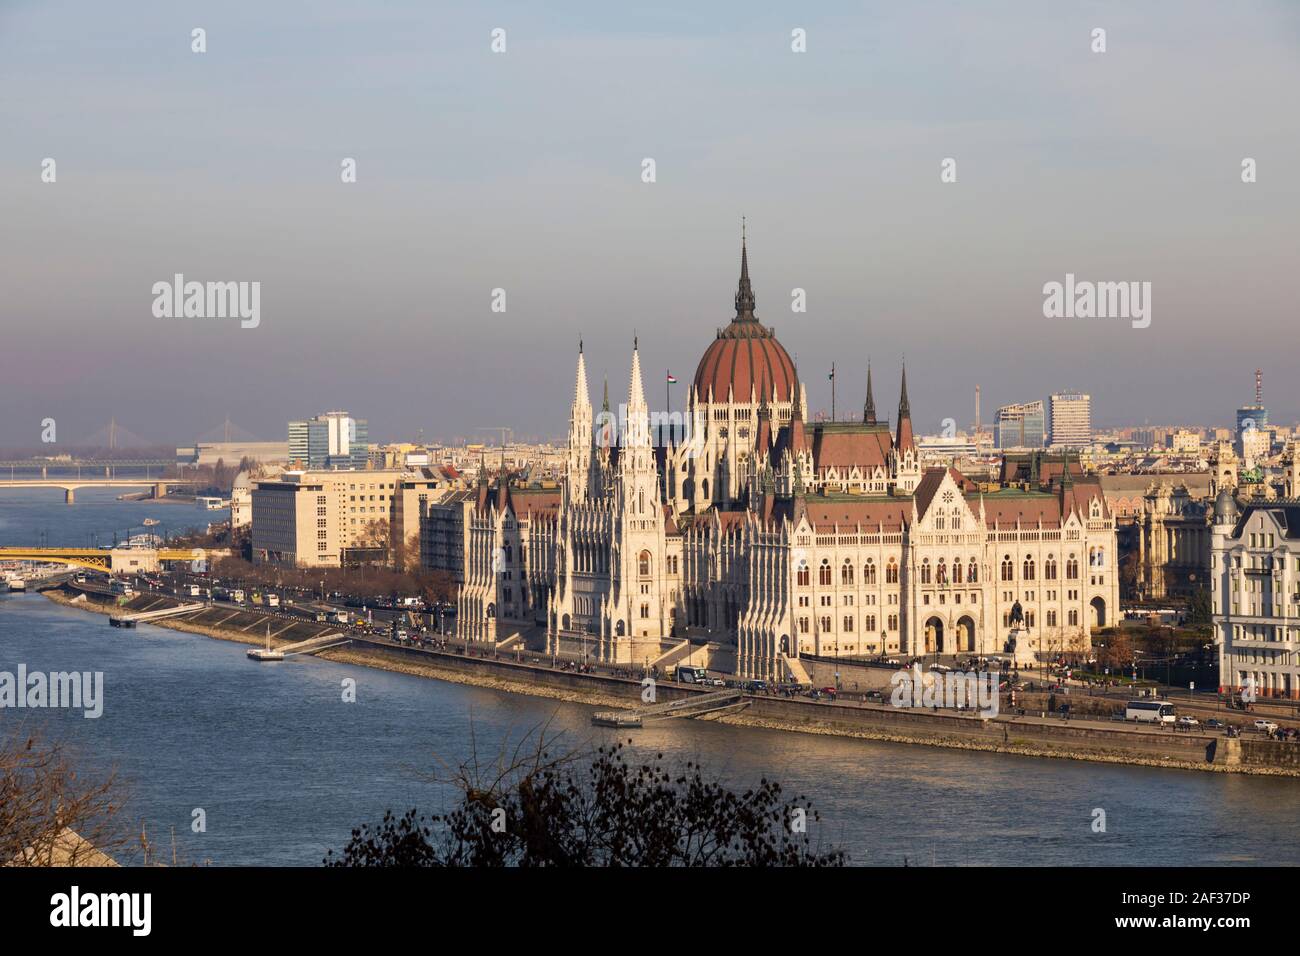 The Hungarian Parliament Building, Orszaghaz, over the River Danube. Winter in Budapest, Hungary. December 2019 Stock Photo